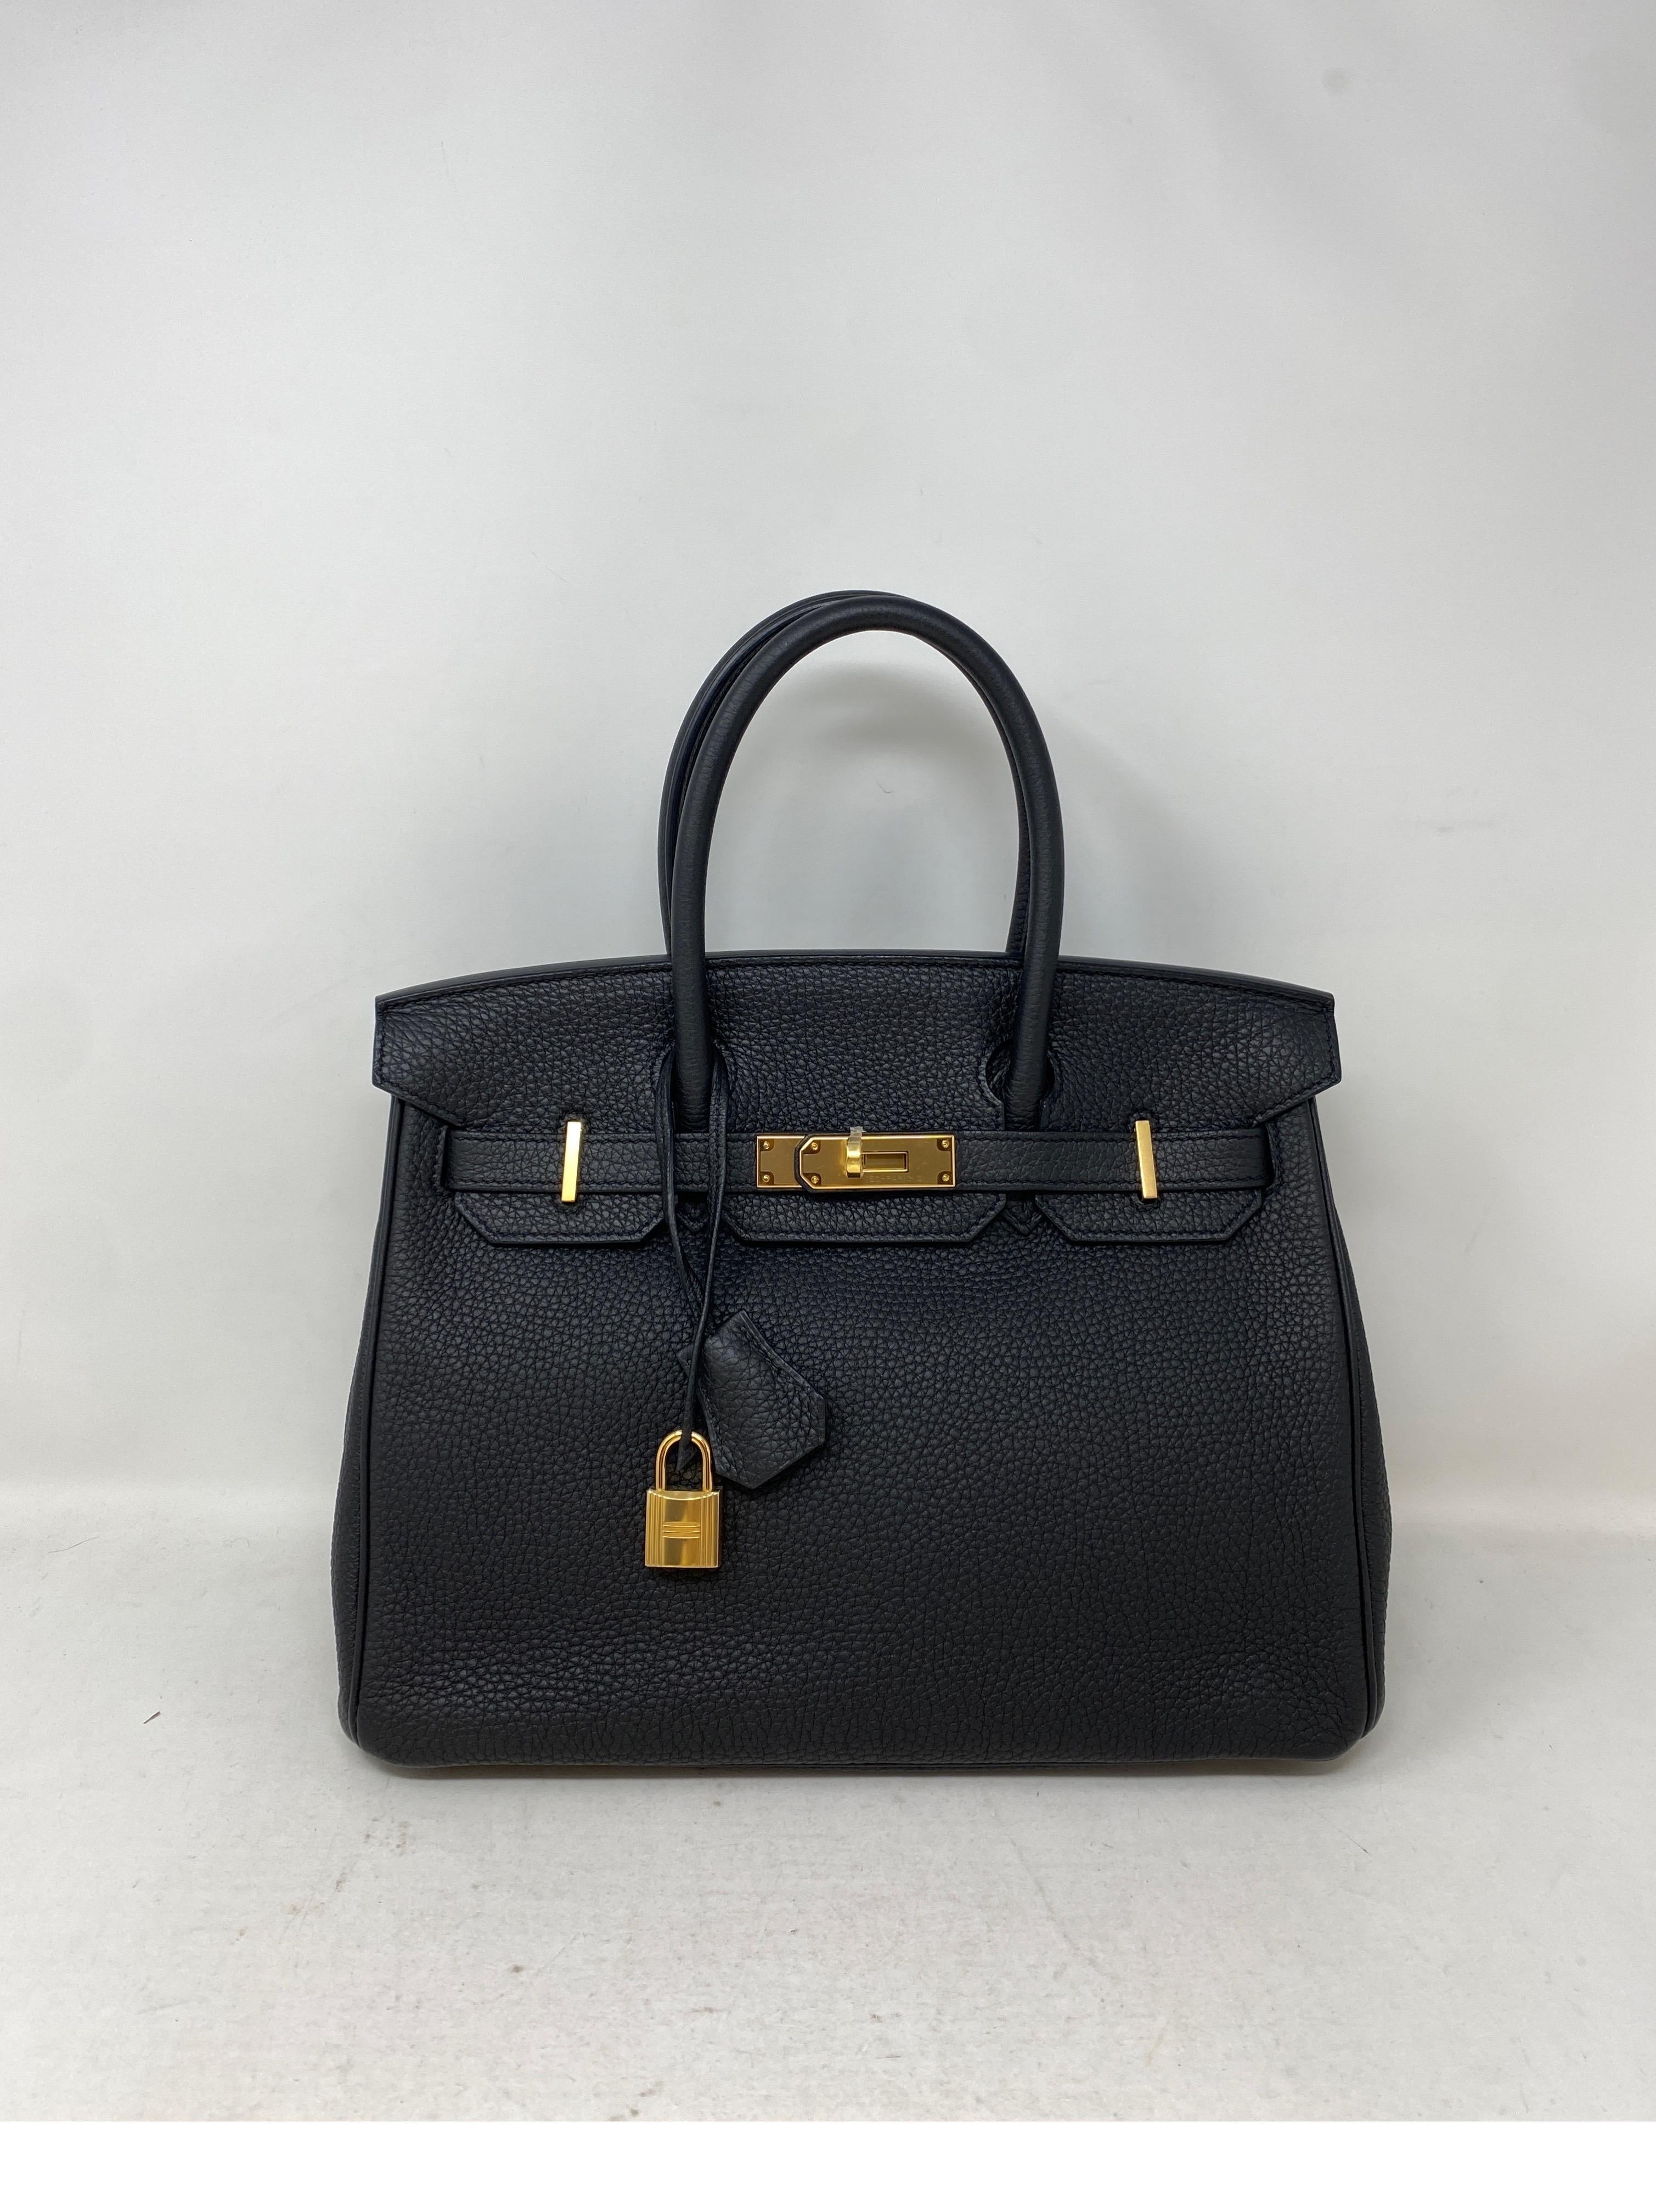 Hermes Black Birkin 30 Bag. Gold hardware. Most wanted combination. Classic black and gold. Togo leather. Excellent conditon. Like new from 2017. Plastic still on hardware. Best investment bag. Classic size 30. Includes clochette, lock, keys, and